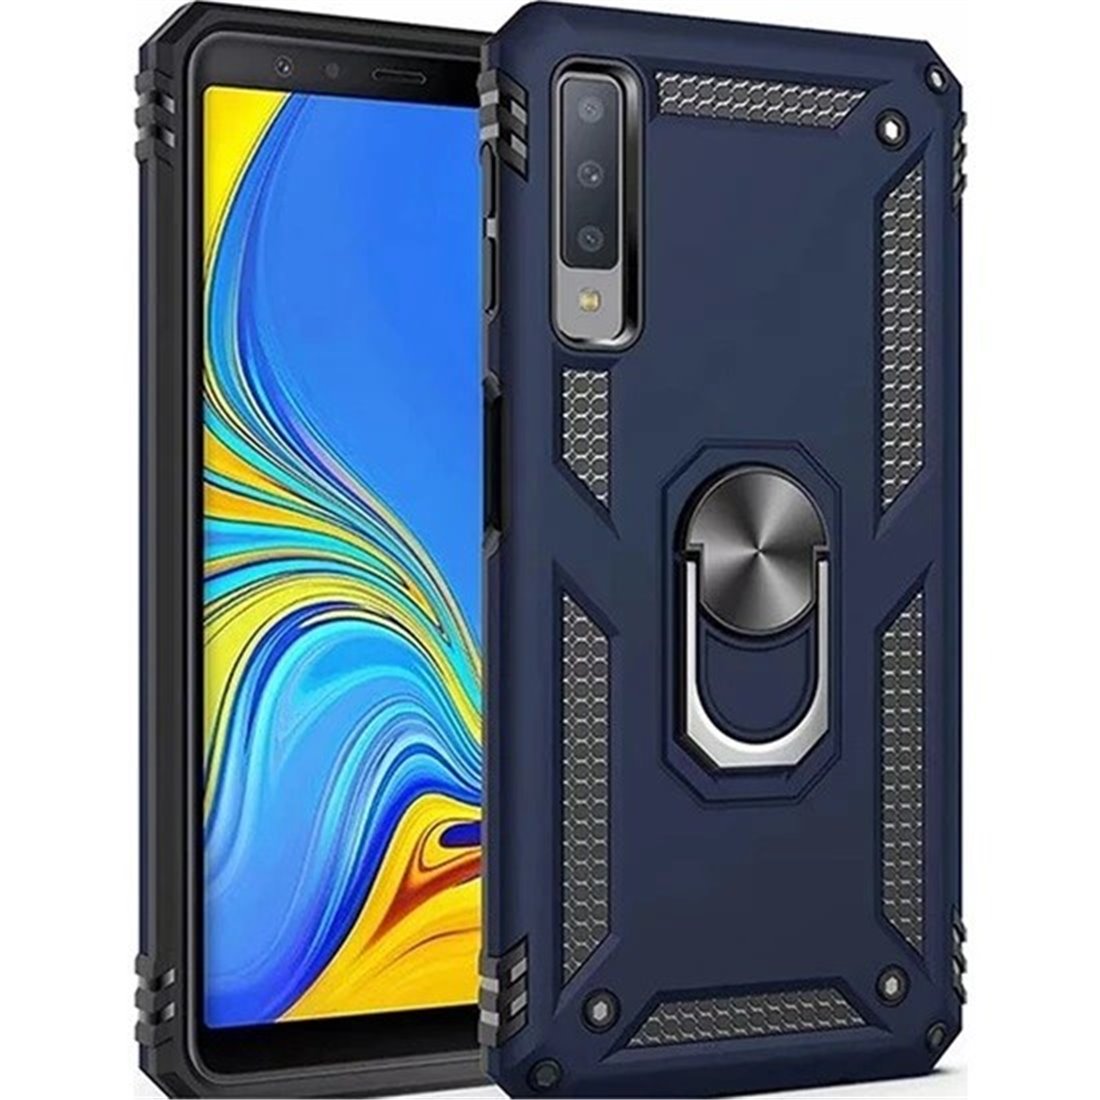 Samsung Galaxy M20 Plastic Blue Back Cover - Solid ring